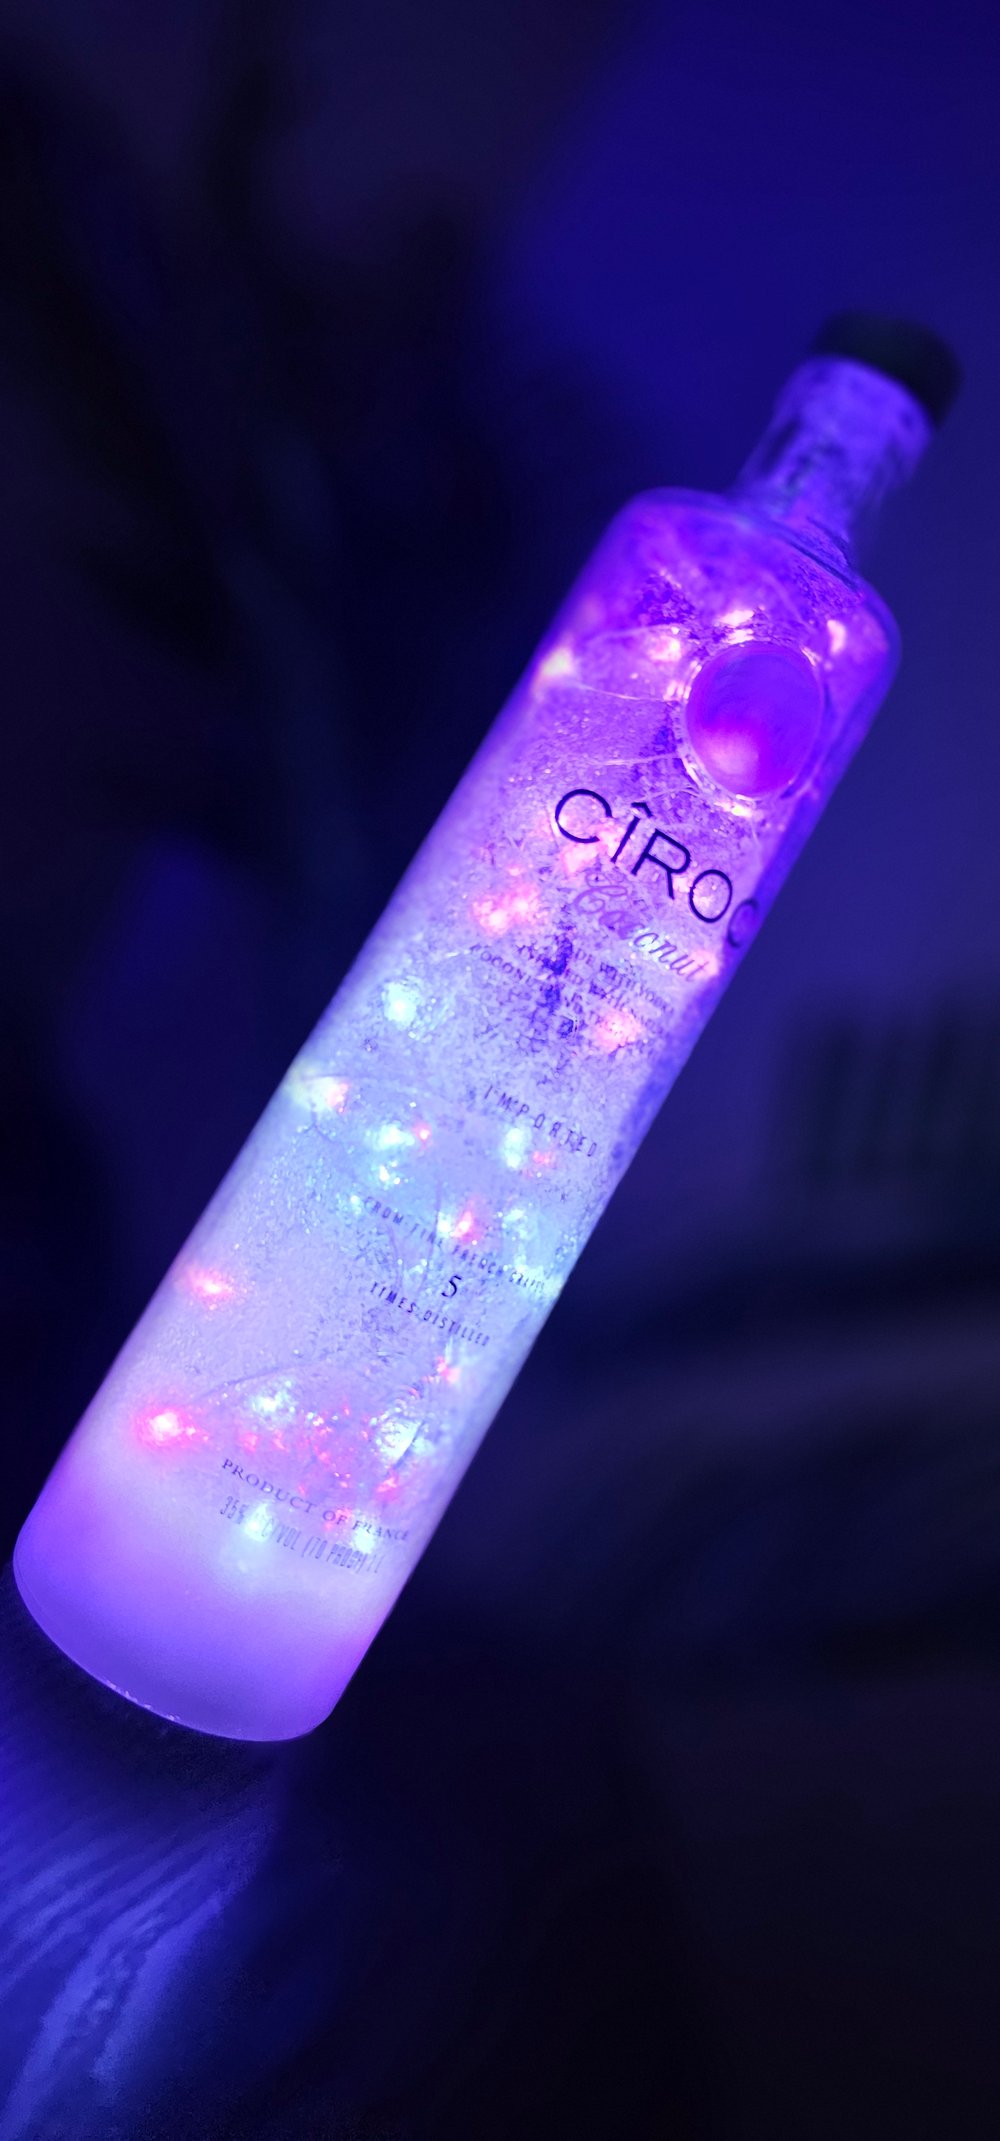 Ciroc One Liter Red and Purple BottleLights